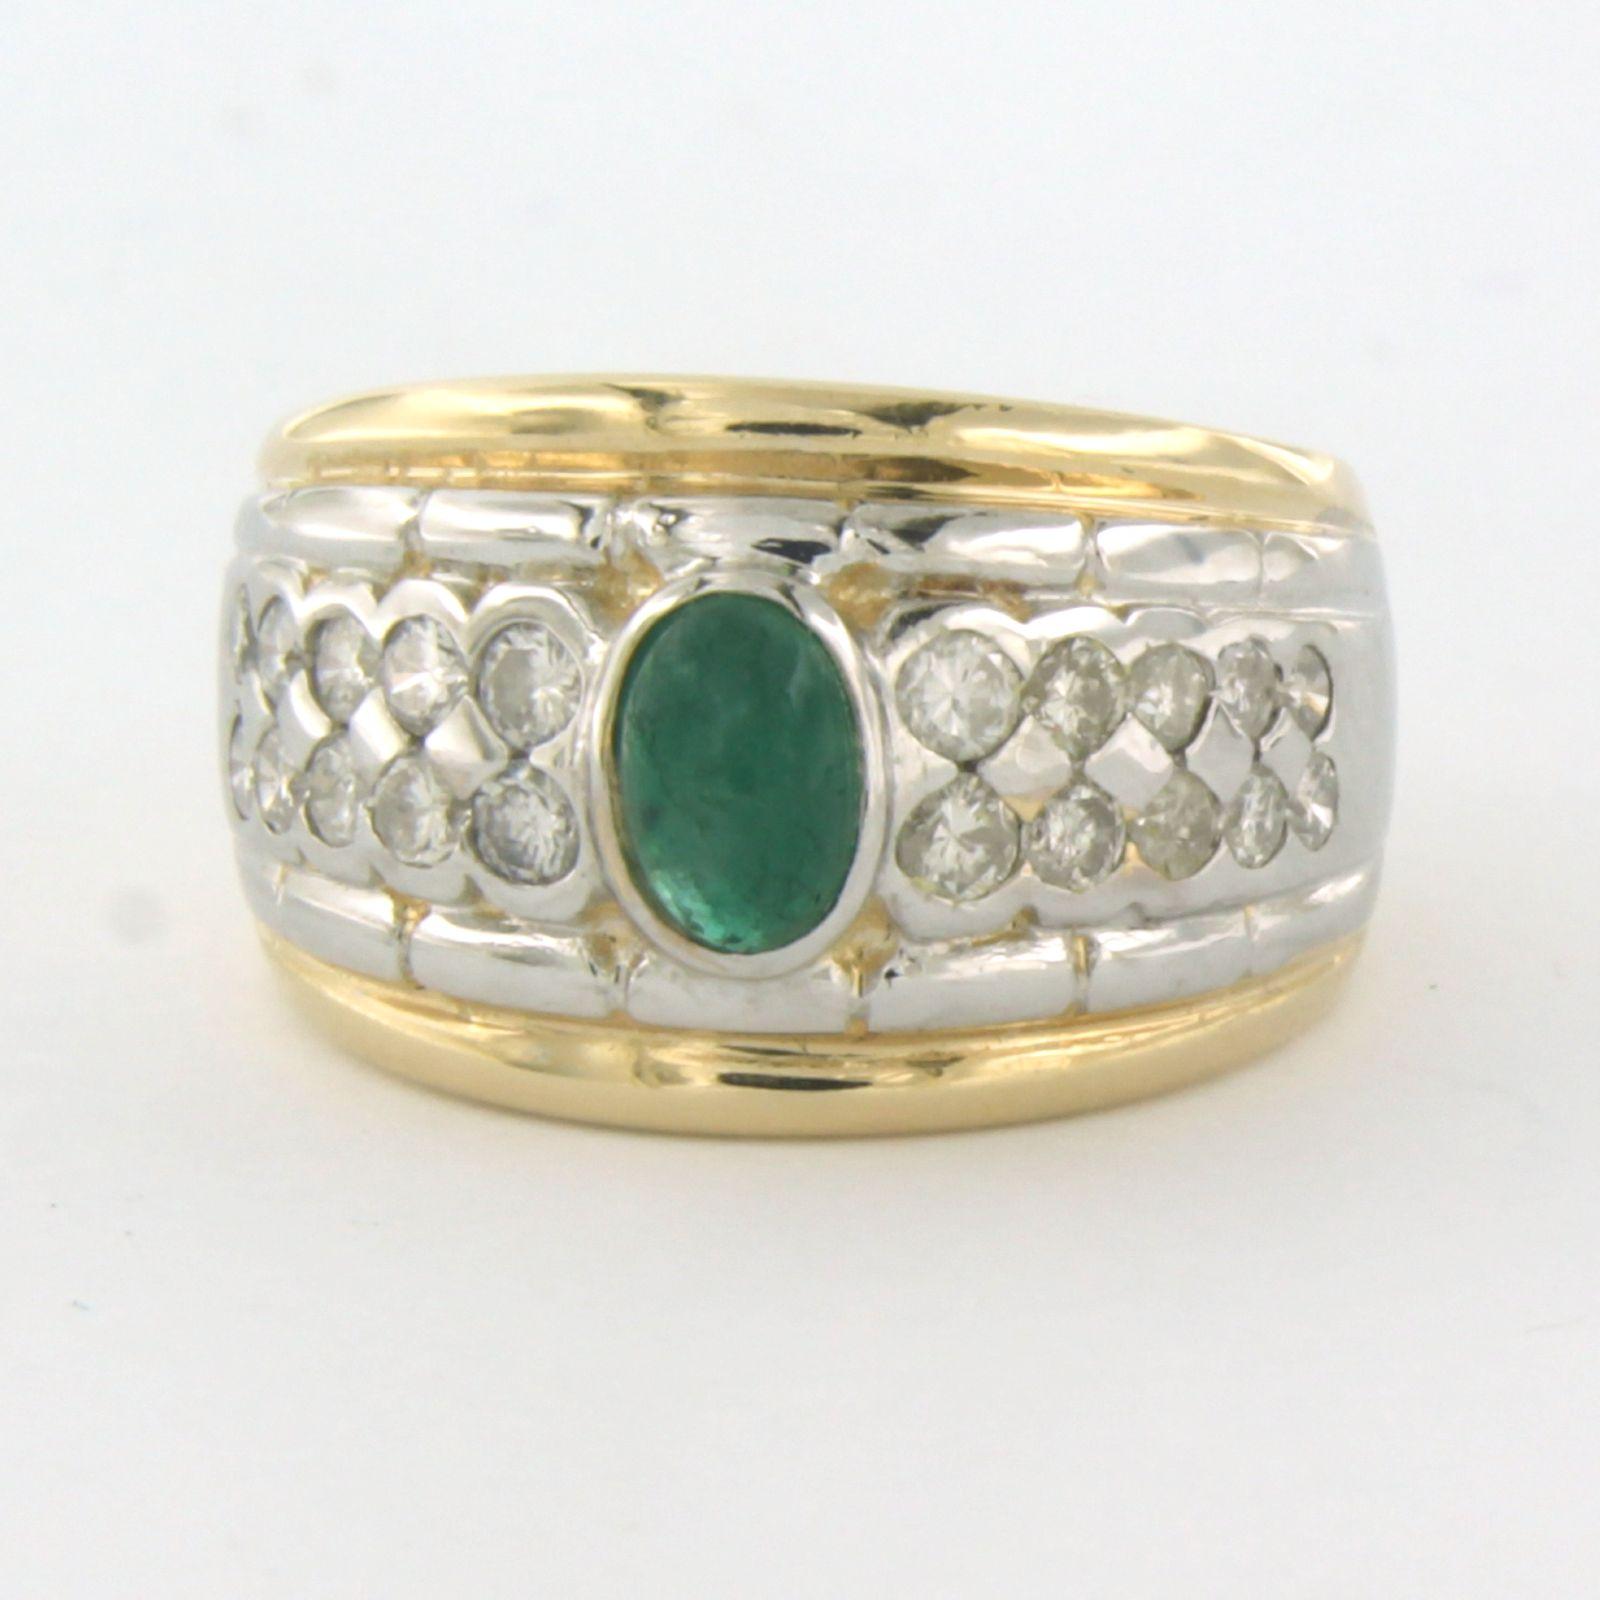 14k bicolour gold ring set with emerald and brilliant cut diamond, approximately 0.40 carats in total G/H - SI/P - ring size U.S. 6 -EU. 16.5(52)

Detailed description

the top of the ring is 1.2 cm wide and 5.9 mm high

Ring size US 6 - EU.